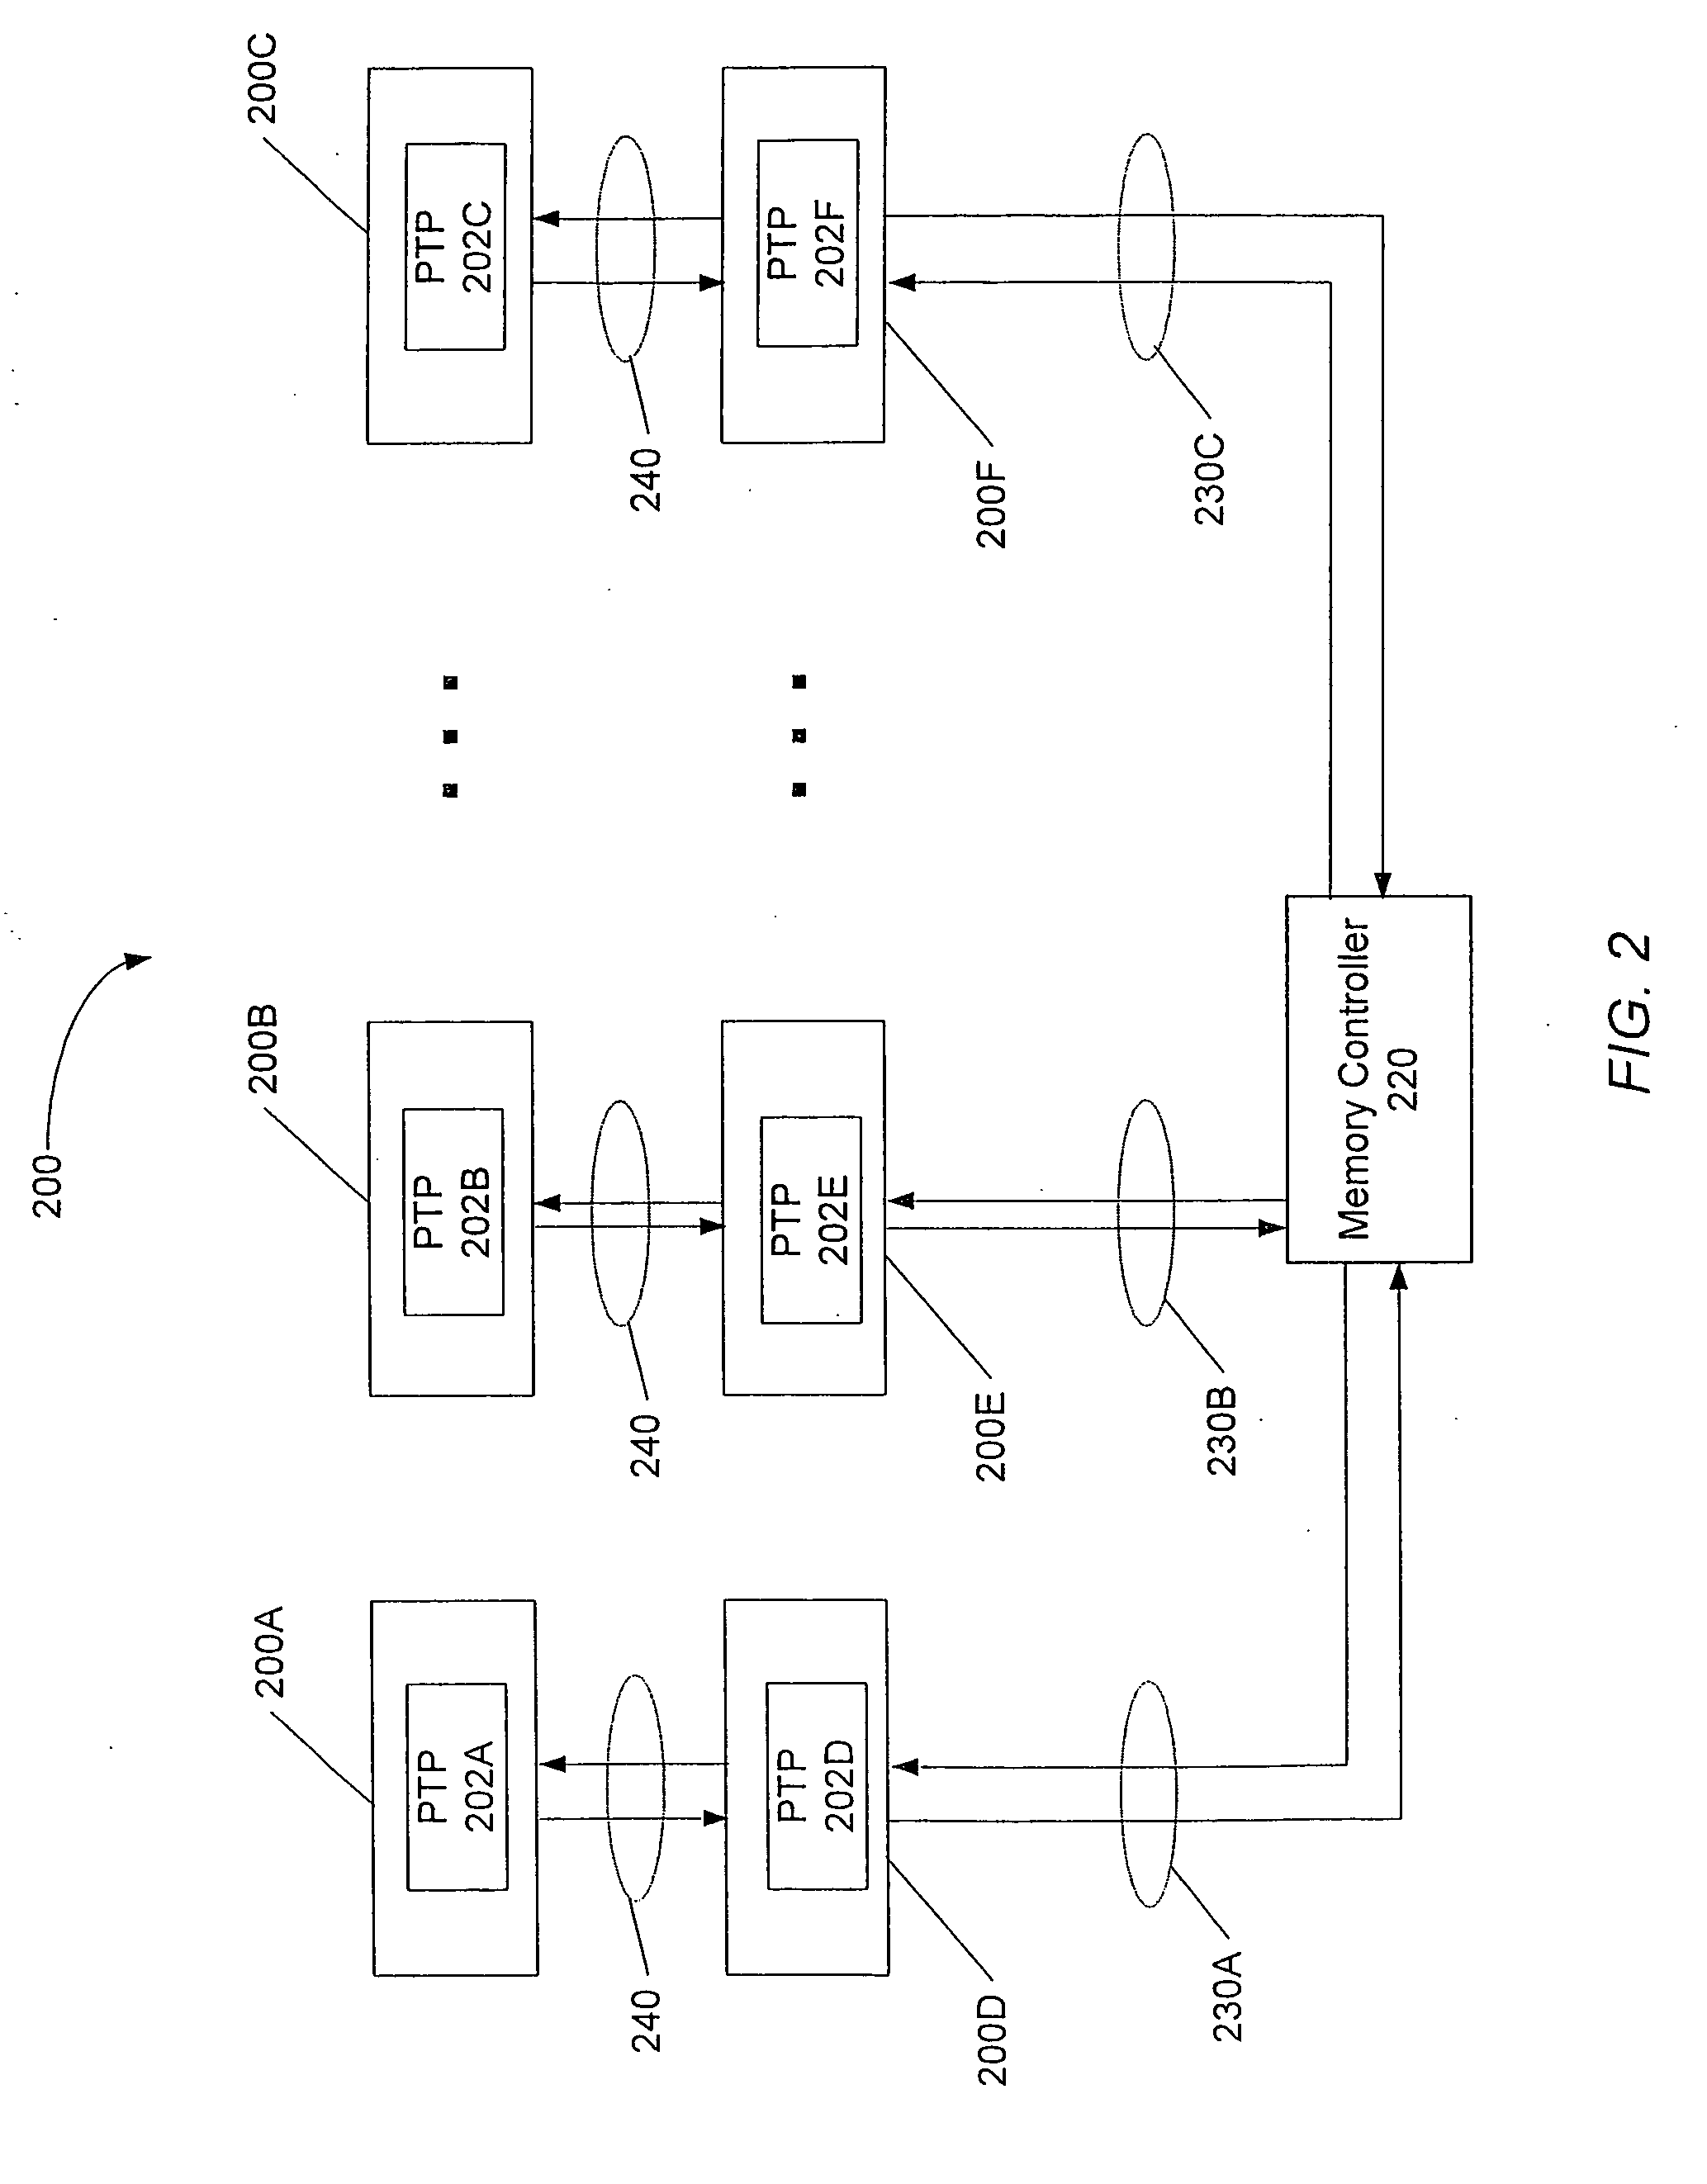 System memory board subsystem using dram with stacked dedicated high speed point to point links